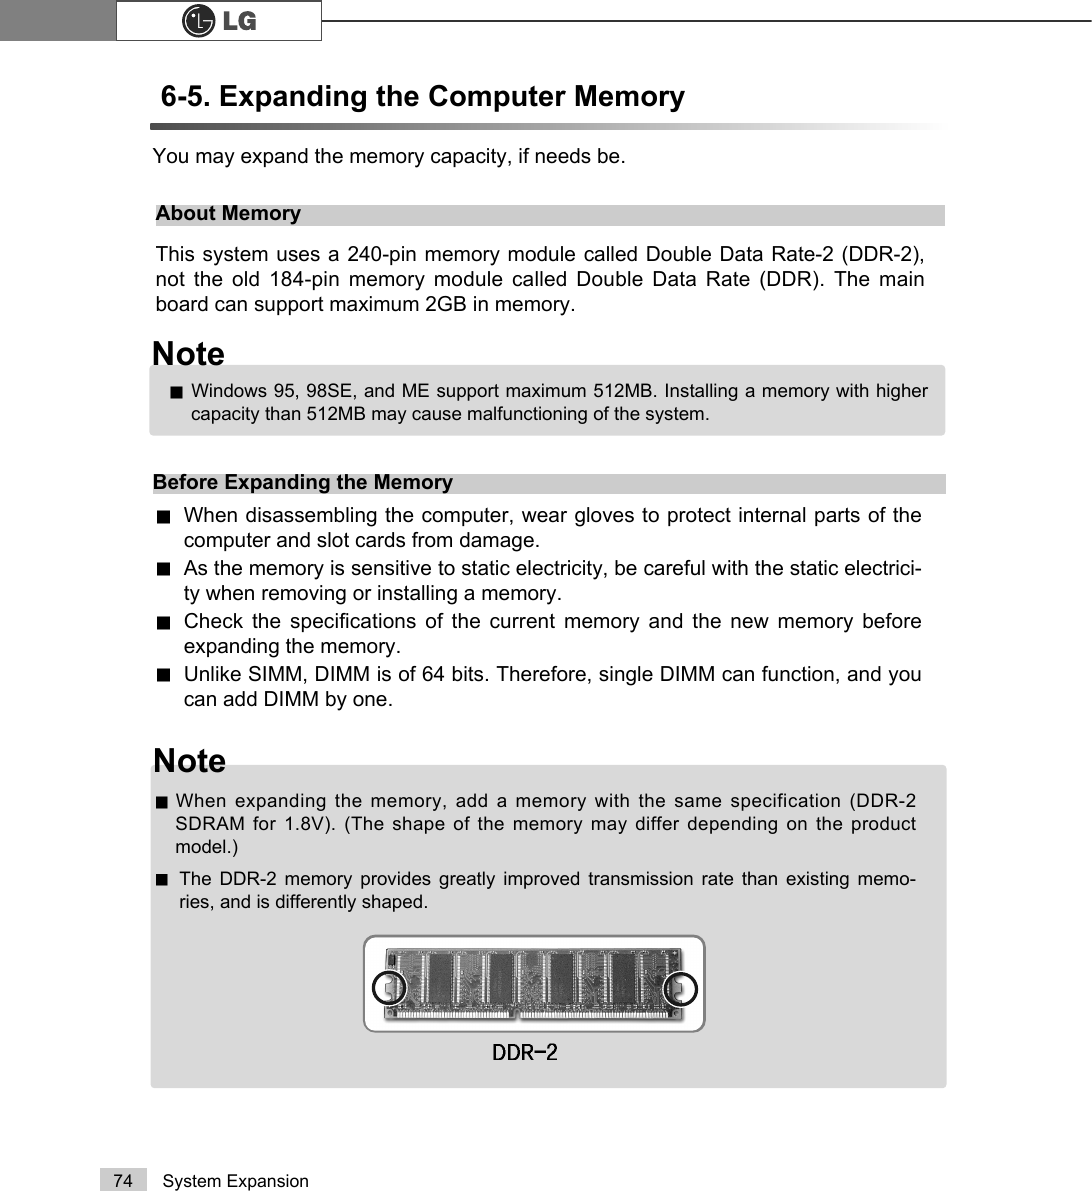 74 System Expansion6-5. Expanding the Computer Memory You may expand the memory capacity, if needs be.About MemoryThis system uses a 240-pin memory module called Double Data Rate-2 (DDR-2),not the old 184-pin memory module called Double Data Rate (DDR). The mainboard can support maximum 2GB in memory.Before Expanding the MemoryWhen disassembling the computer, wear gloves to protect internal parts of thecomputer and slot cards from damage.As the memory is sensitive to static electricity, be careful with the static electrici-ty when removing or installing a memory.Check the specifications of the current memory and the new memory beforeexpanding the memory.Unlike SIMM, DIMM is of 64 bits. Therefore, single DIMM can function, and youcan add DIMM by one.Windows 95, 98SE, and ME support maximum 512MB. Installing a memory with highercapacity than 512MB may cause malfunctioning of the system.NoteNoteWhen expanding the memory, add a memory with the same specification (DDR-2SDRAM for 1.8V). (The shape of the memory may differ depending on the productmodel.)The DDR-2 memory provides greatly improved transmission rate than existing memo-ries, and is differently shaped.